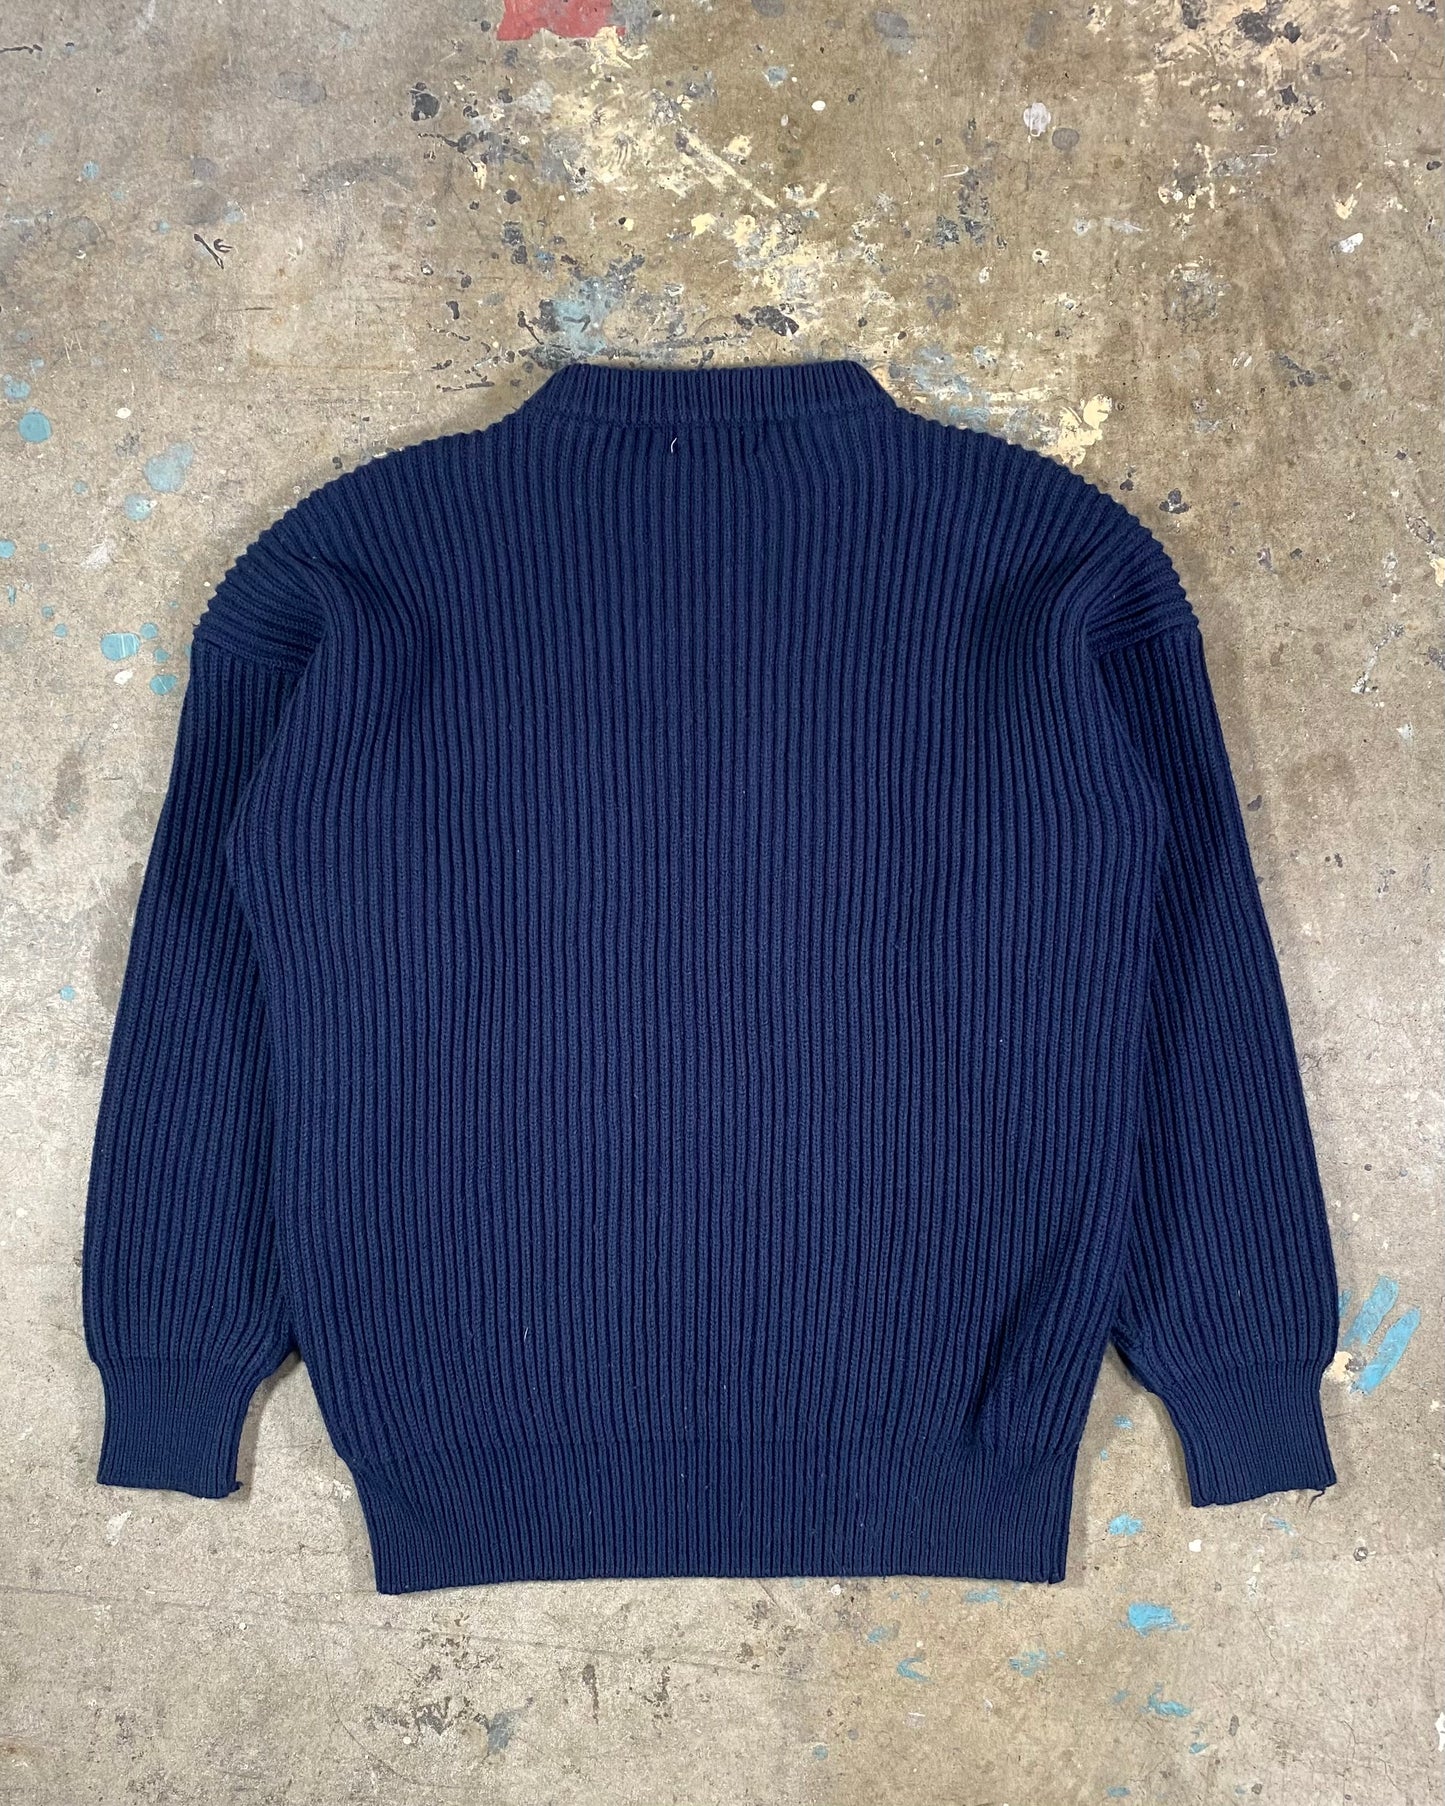 90s Cable Knit Sweater (M)